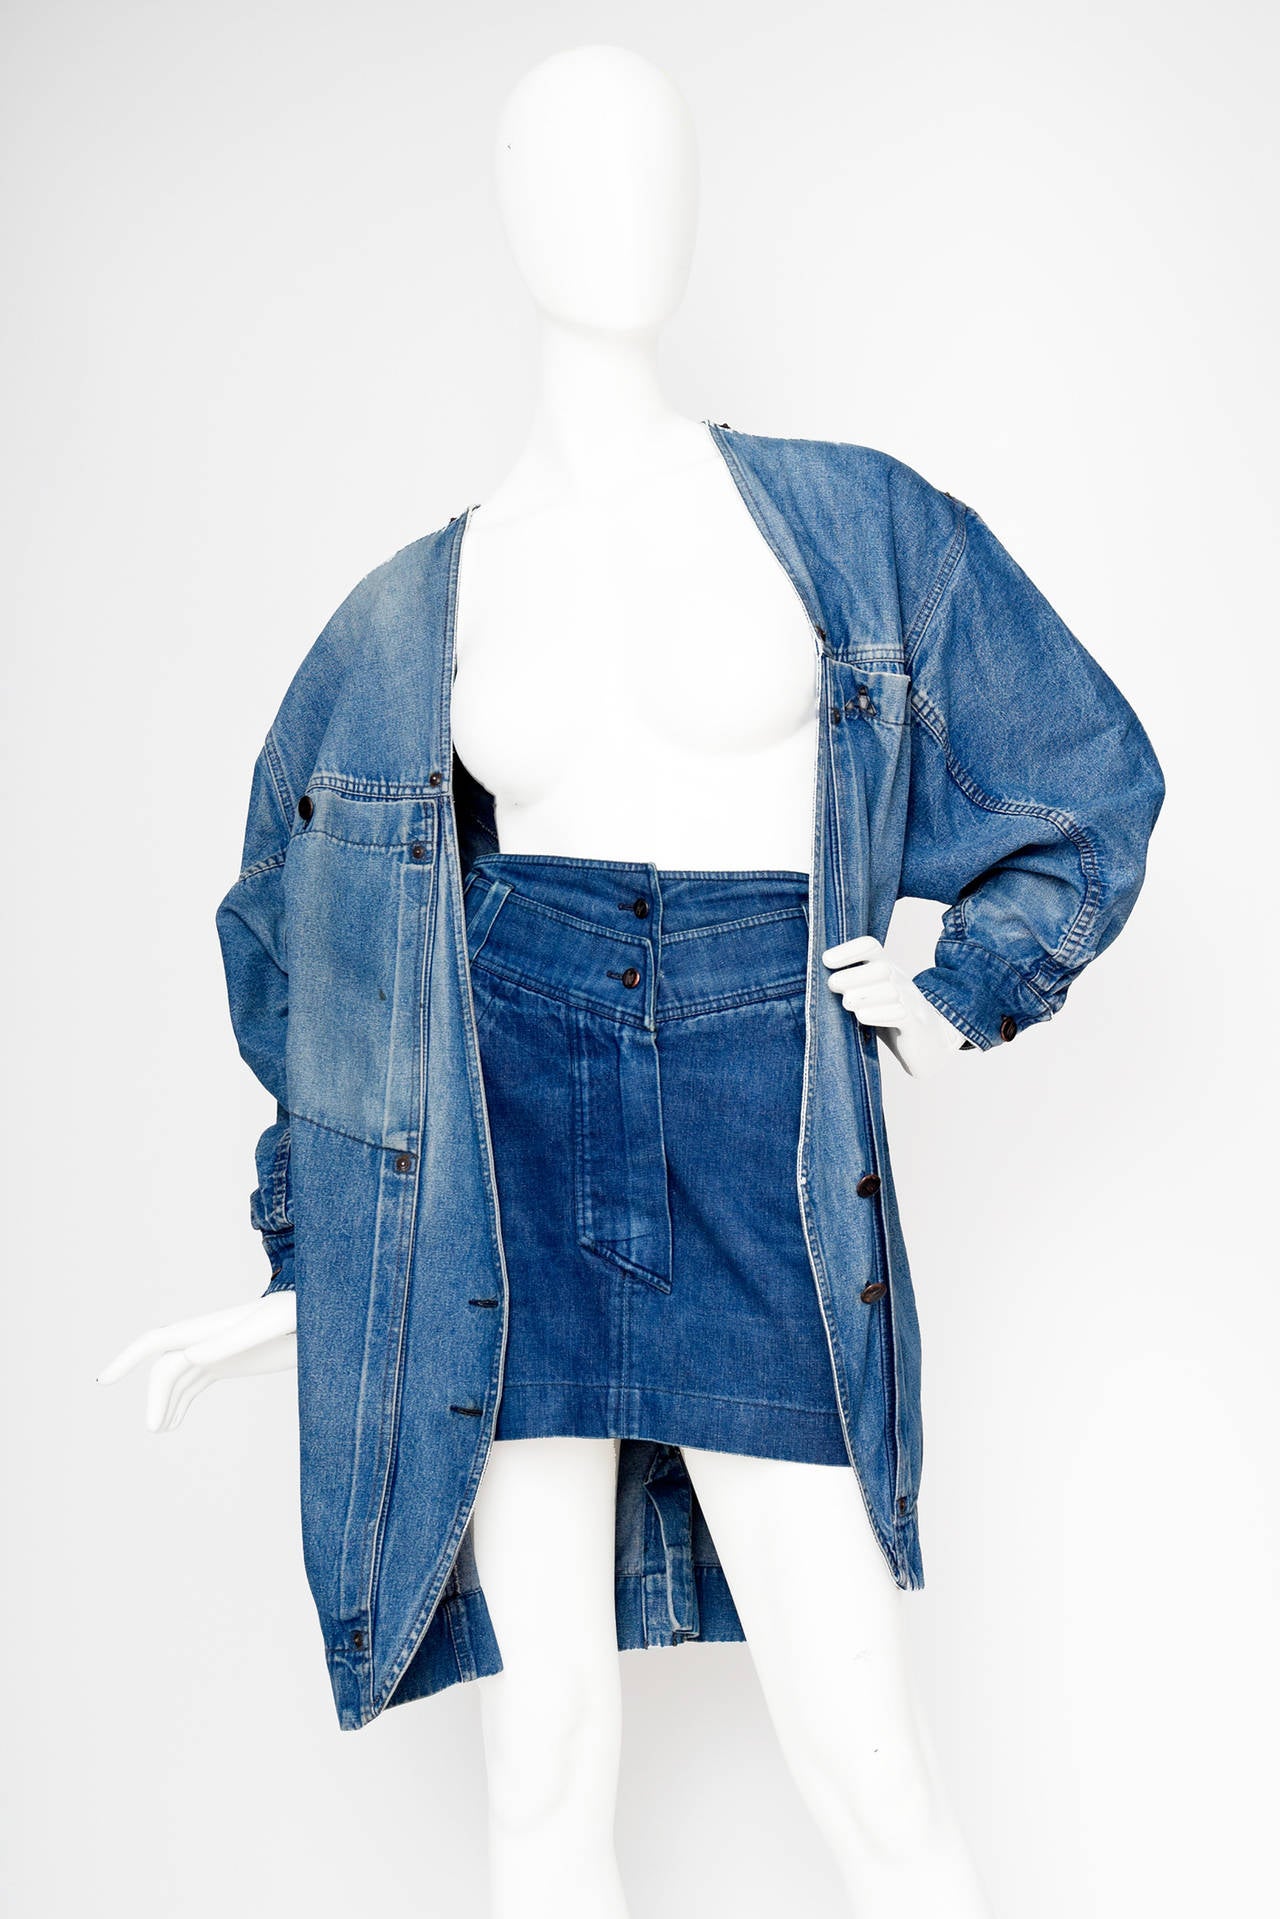 A 1980s Claude Montana denim jacket and mini skirt ensemble. The jacket has an oversized fit and has two exaggerated patch pockets on the bust and two side pockets. The jacket has a deep v-neckline and closes in the front with a two button closure.